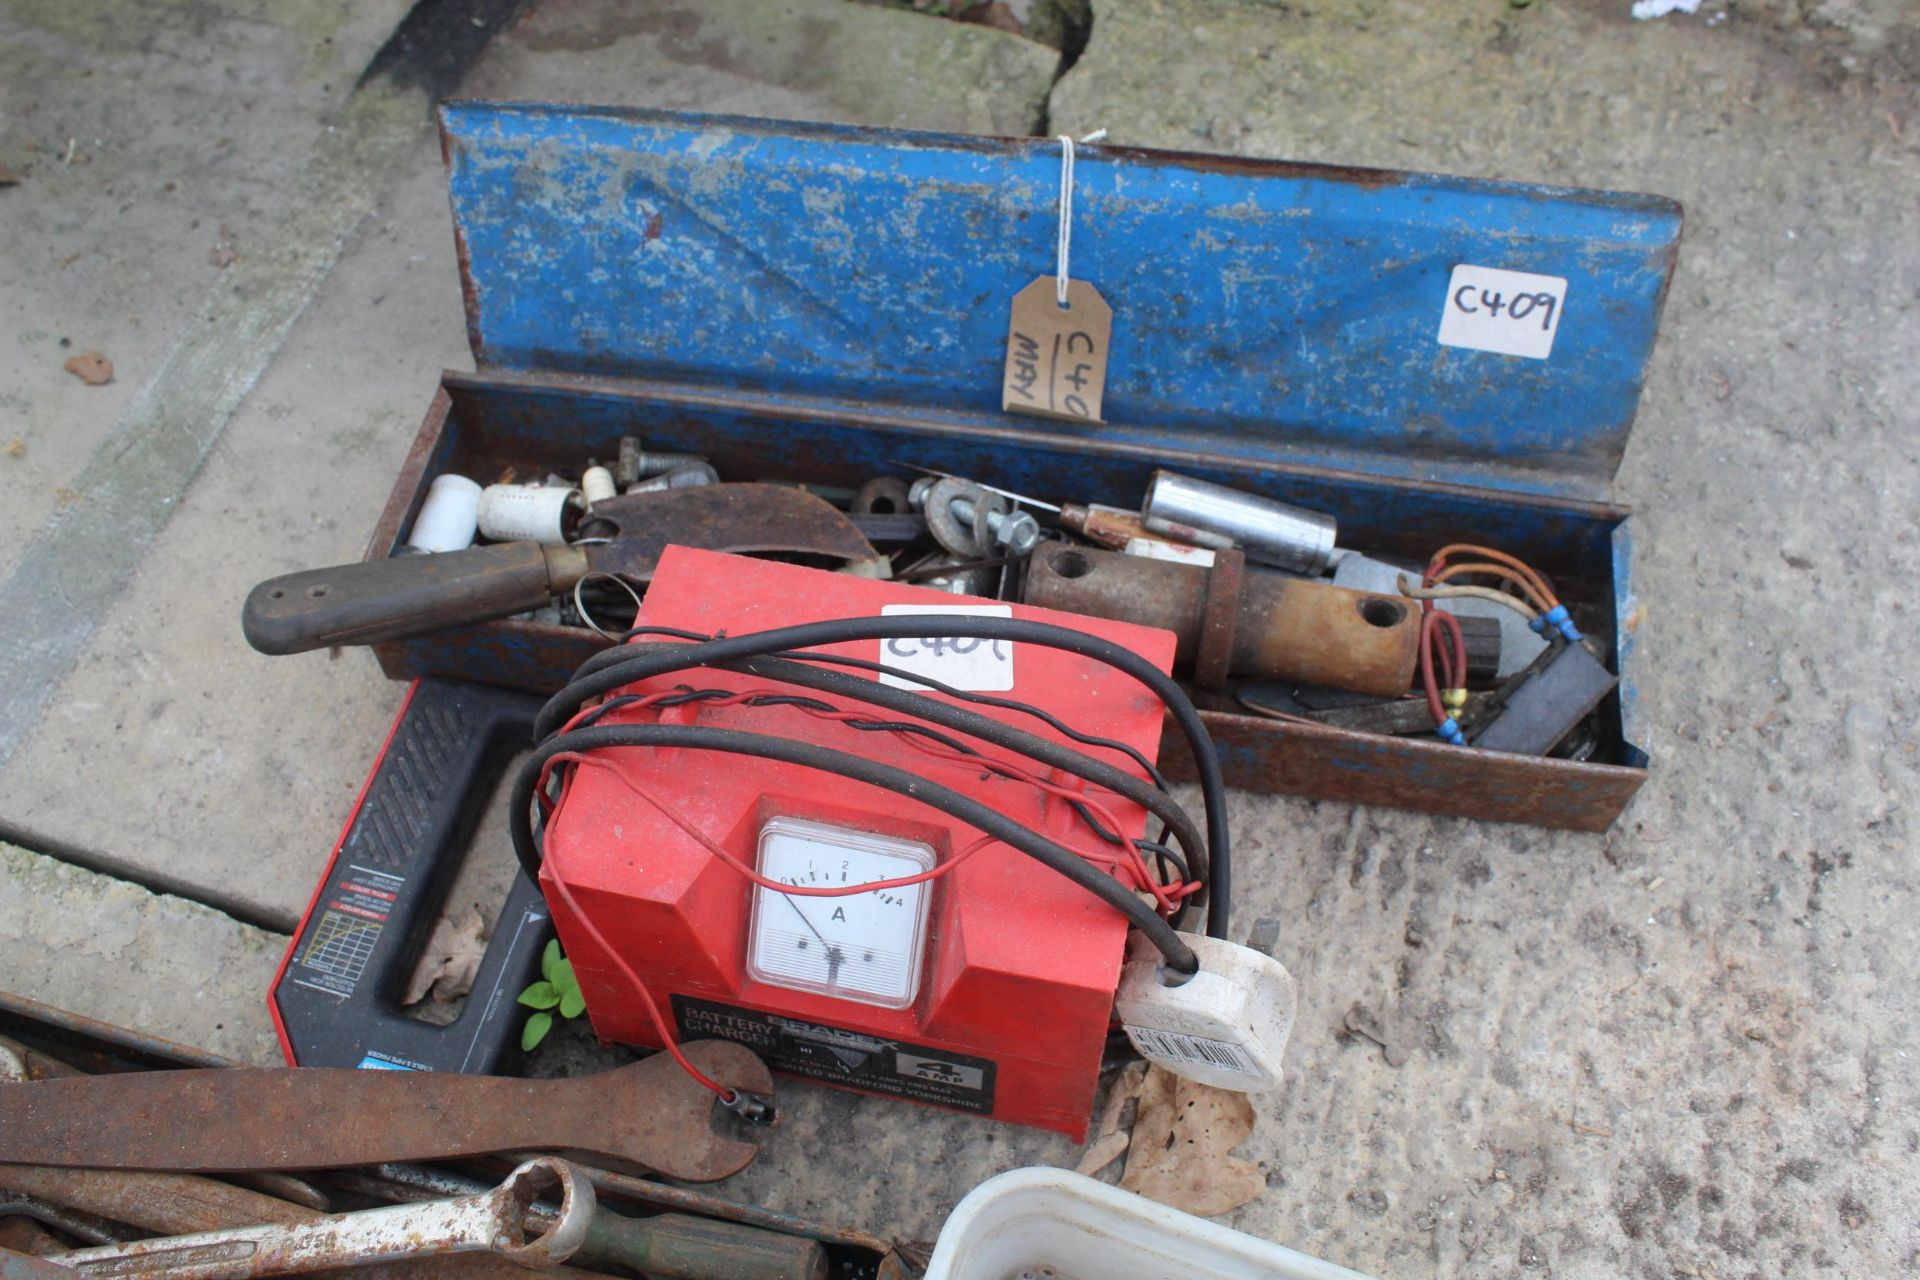 VARIOUS TOOLS, BATTERY CHARGER, BOXES, TAPS, DIES, DRILLS (8 ITEMS) NO VAT - Image 5 of 6